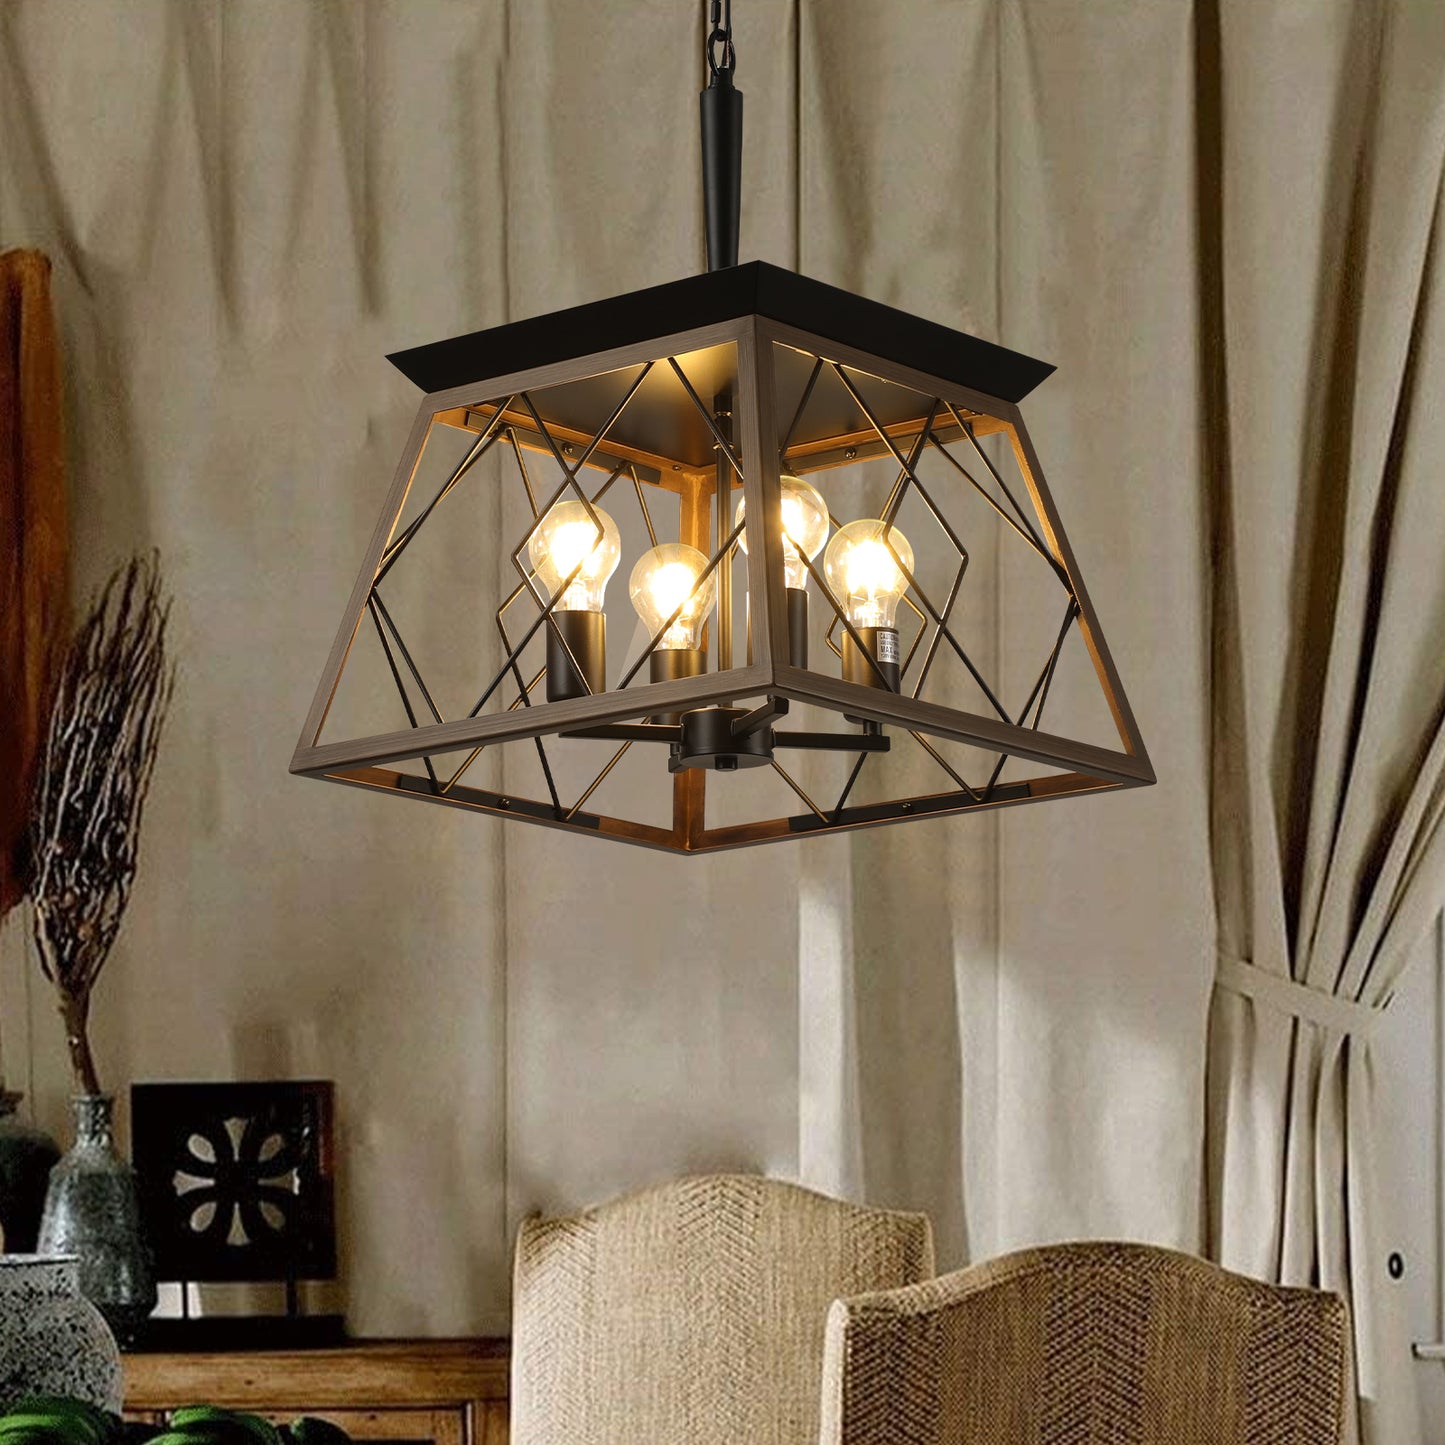 Farmhouse Chandelier 4-Light Vintage Antique Chandeliers Light Fixture For Kitchen Dining Room Living Room(No bulbs)